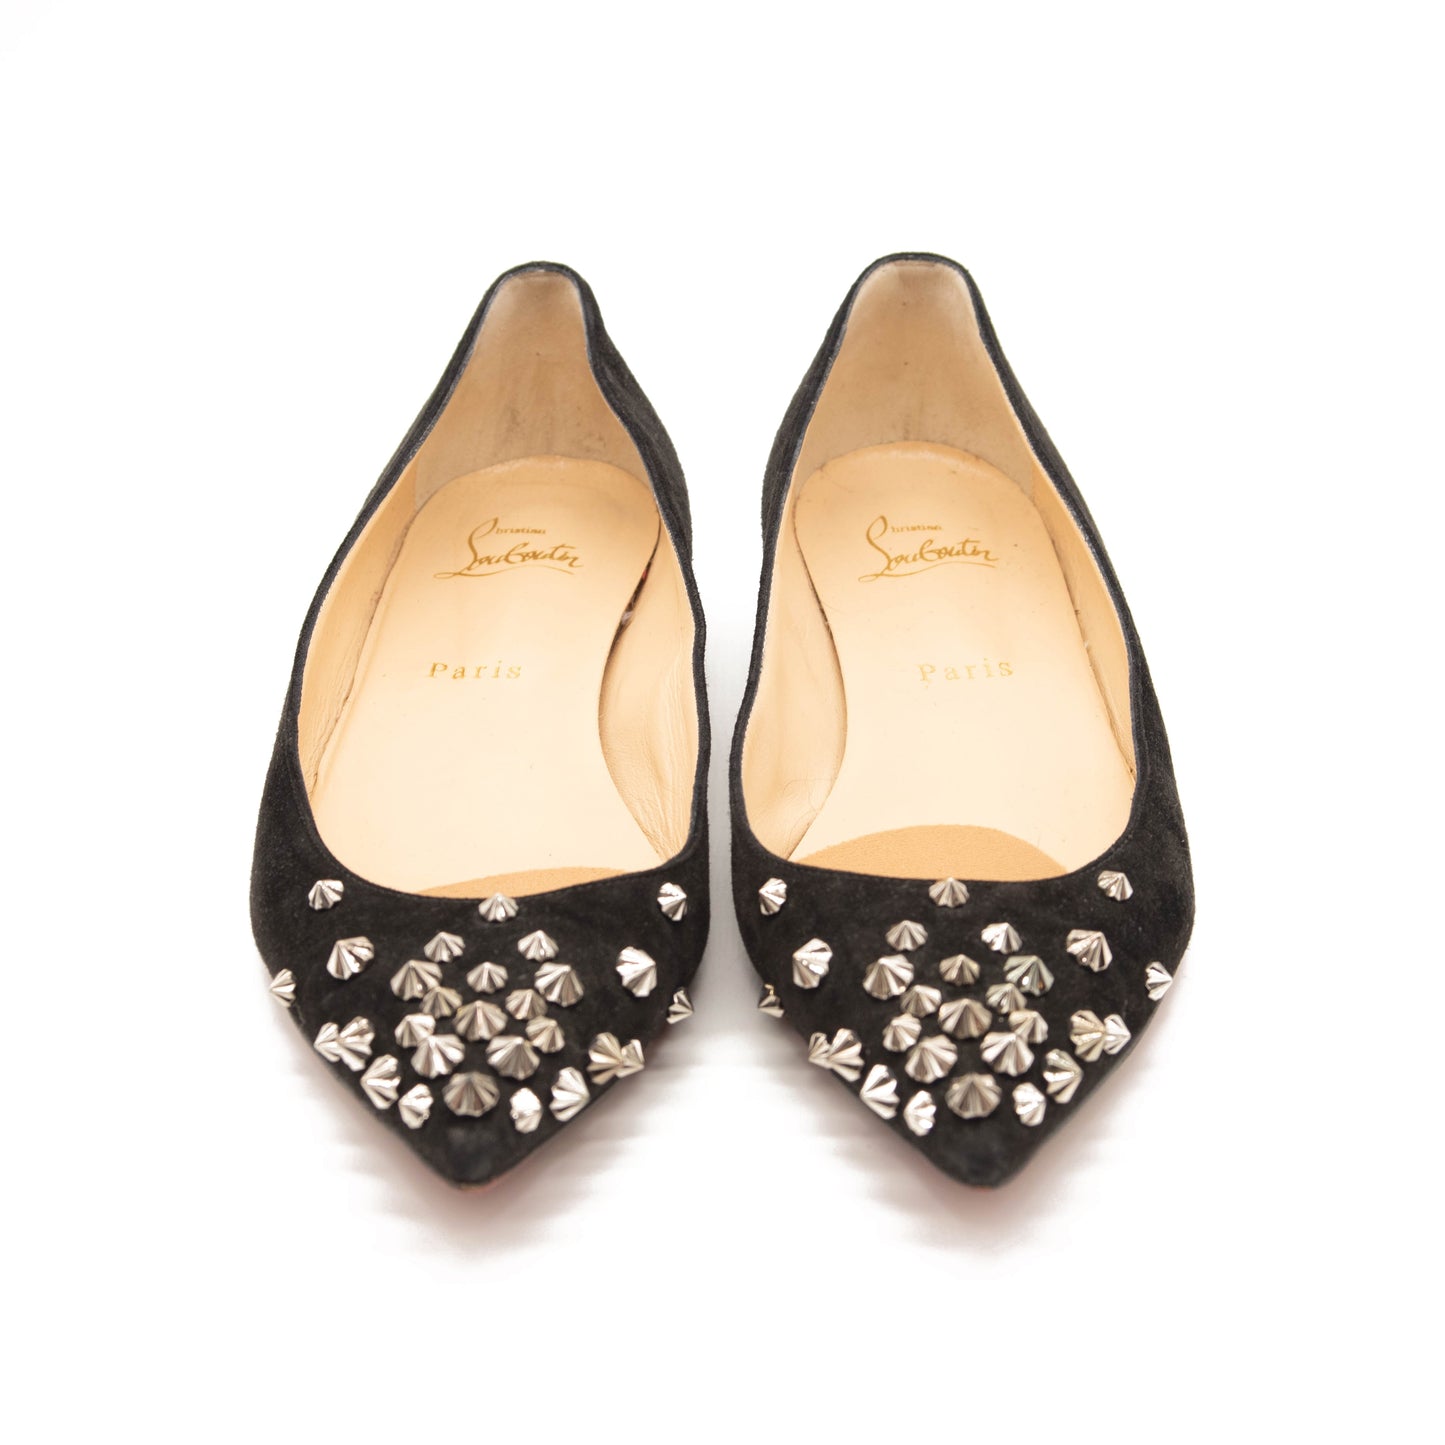 Christian Louboutin Drama Studded Suede Ballet Flats In Black 39